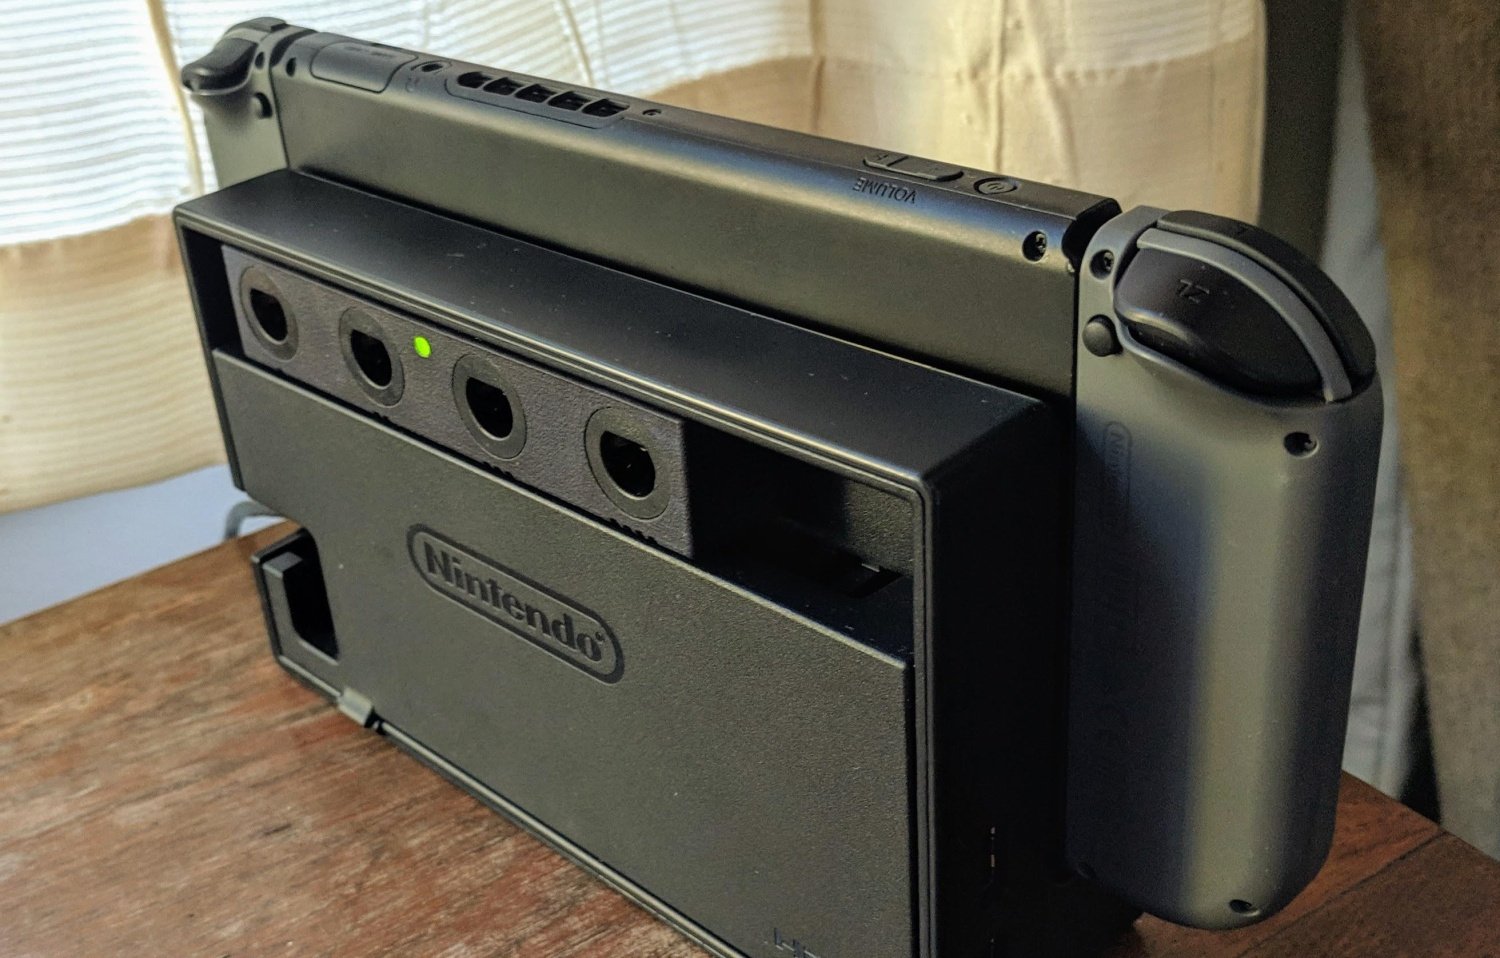 Switch Dock Mod Adds Built In Gamecube Controller Ports Nintendo Life